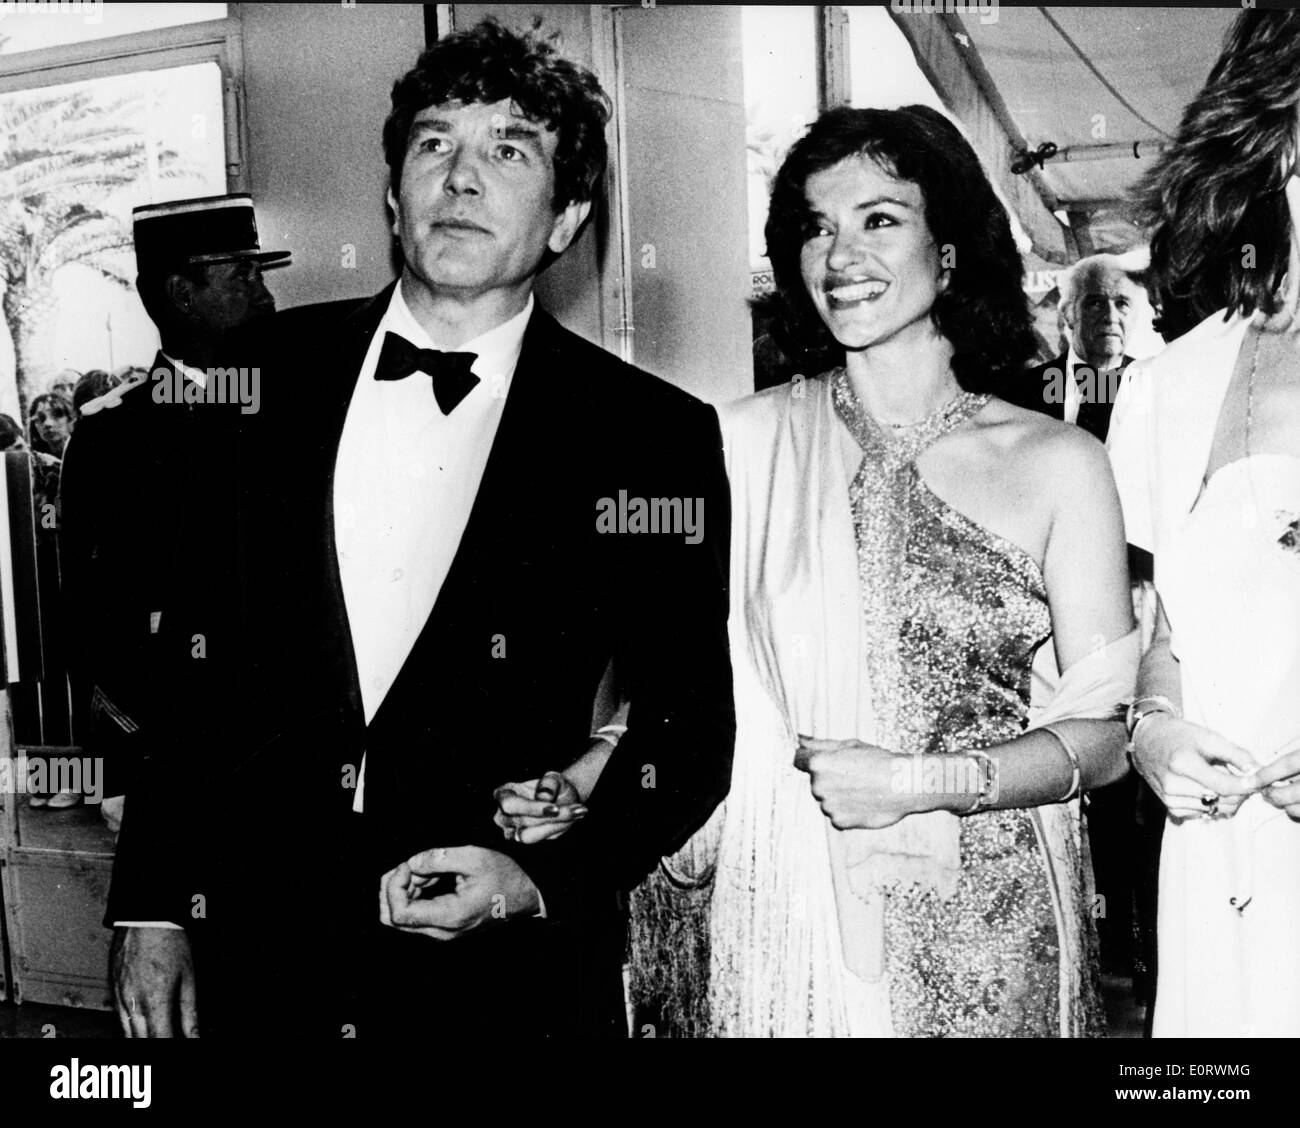 Actors Albert Finney and Anouk Aimee at party Stock Photo